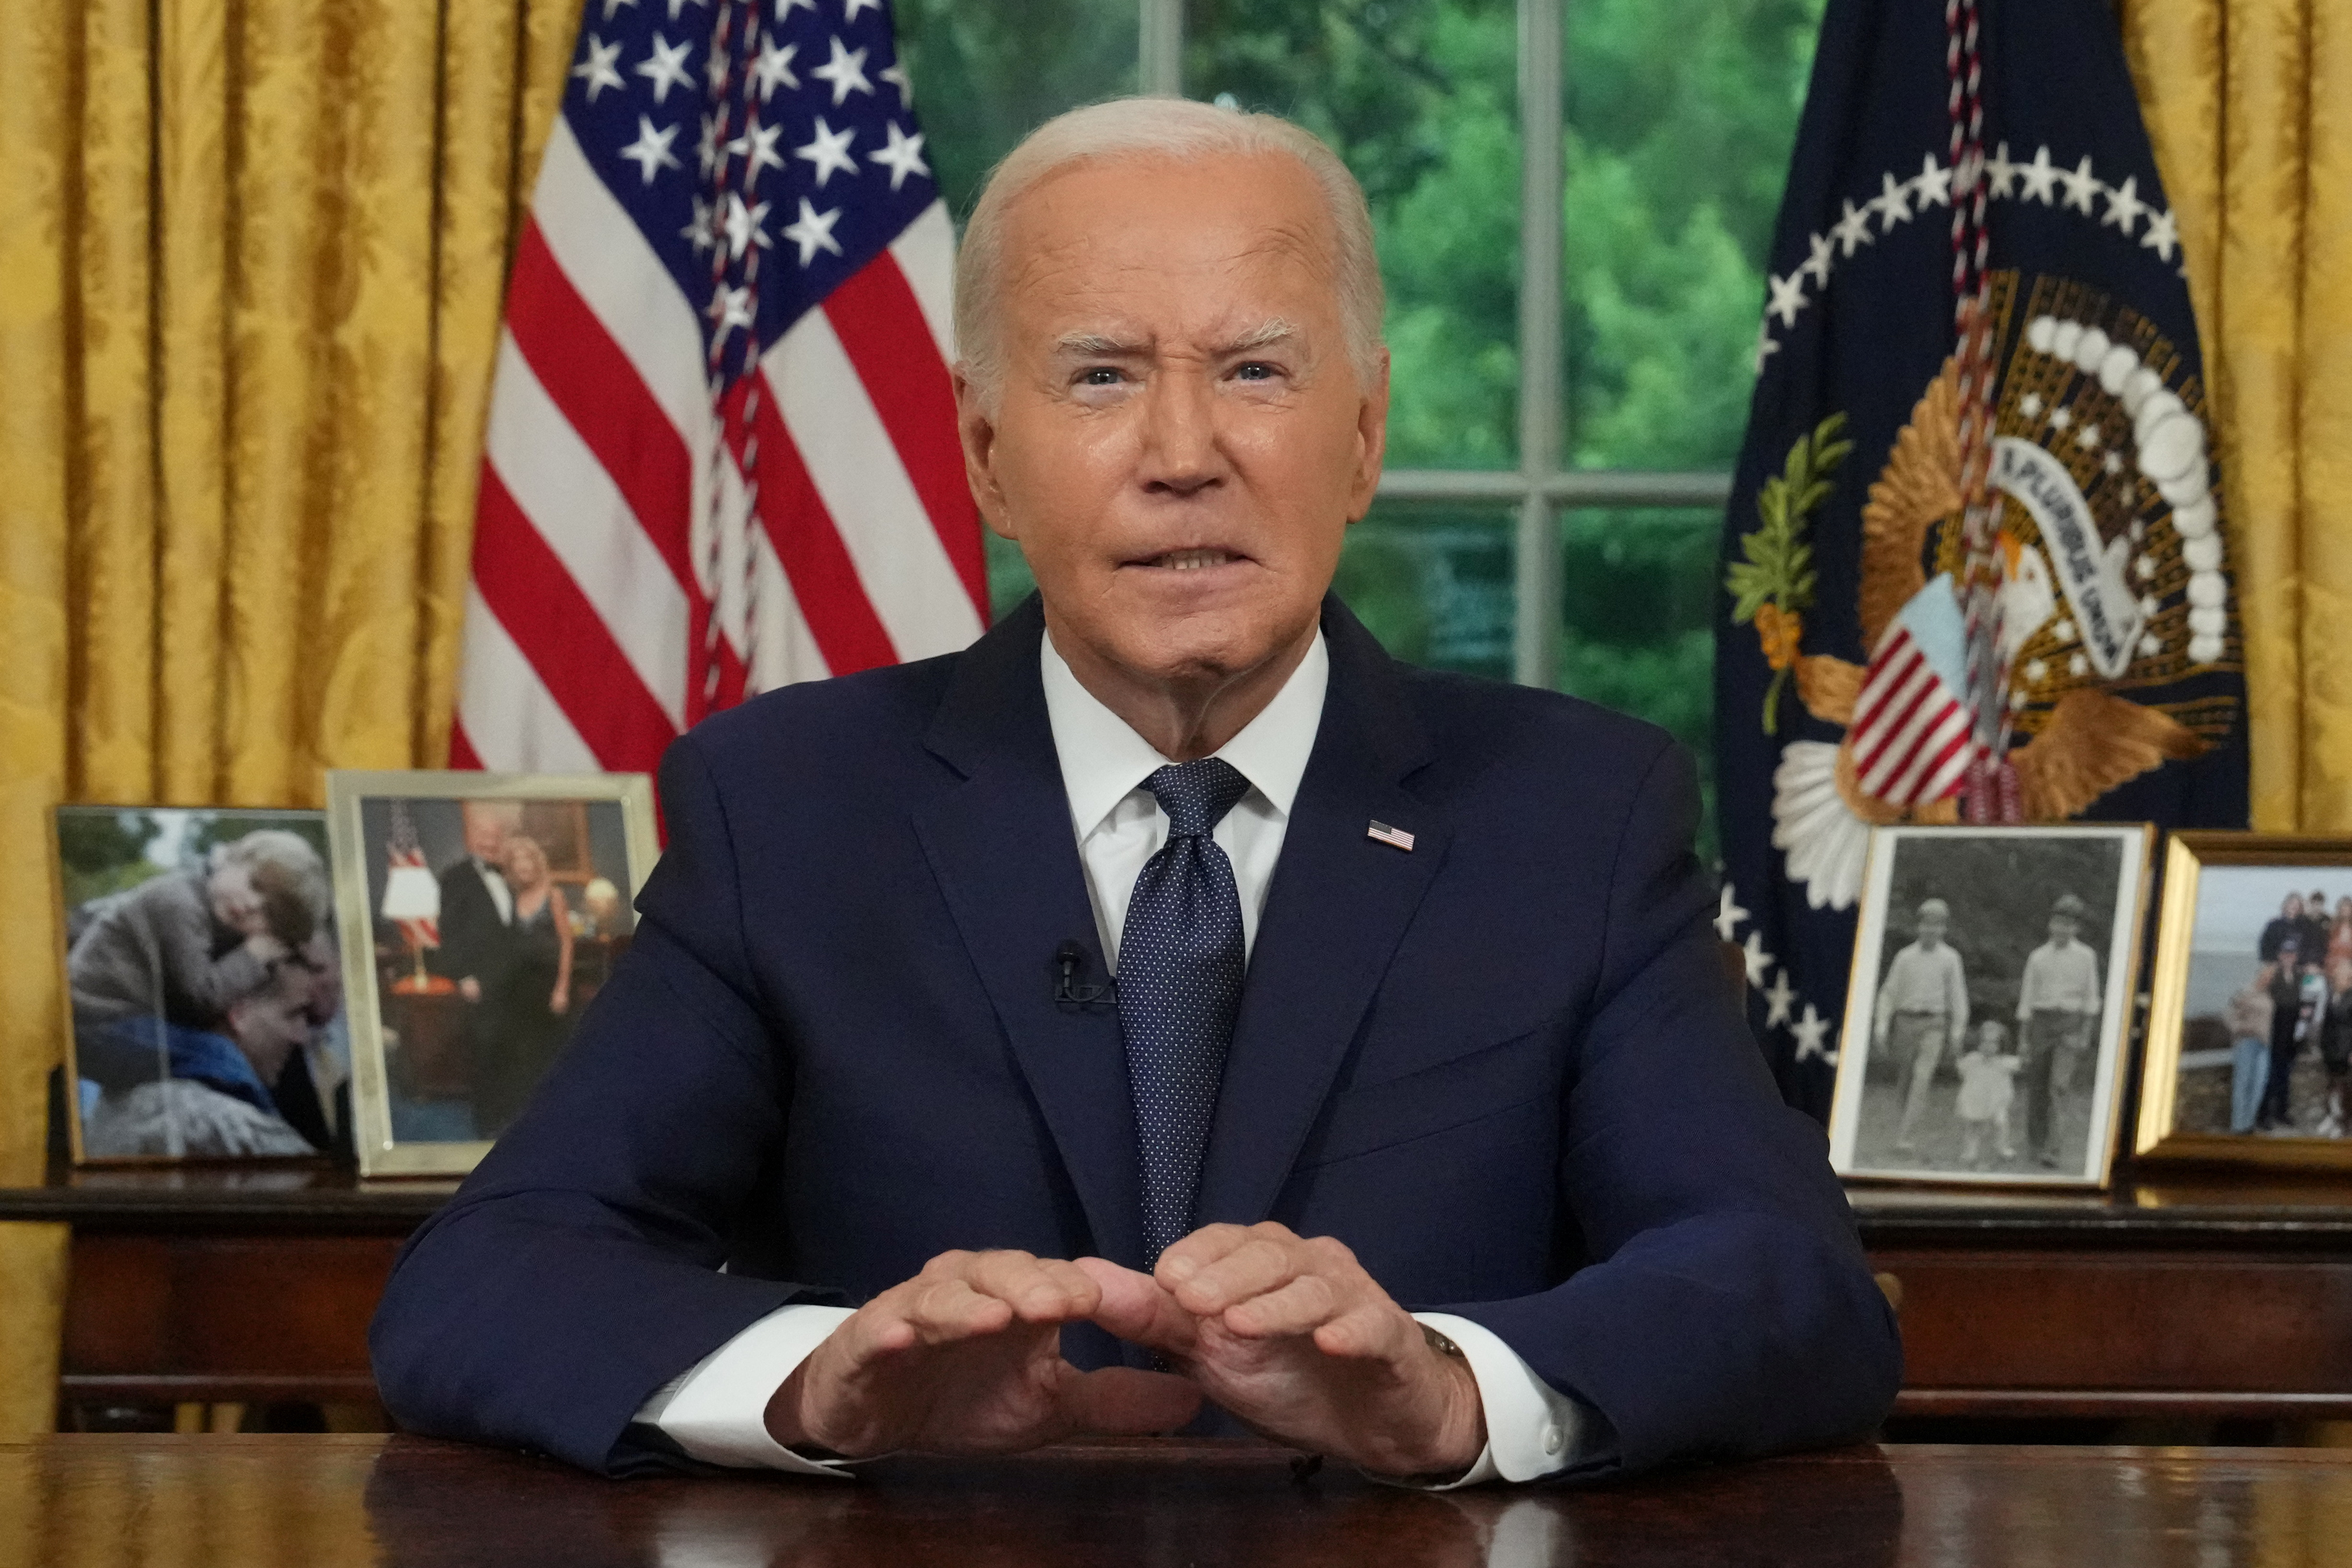 U.S. President Joe Biden addresses the nation from the Oval Office in the White House, in Washington